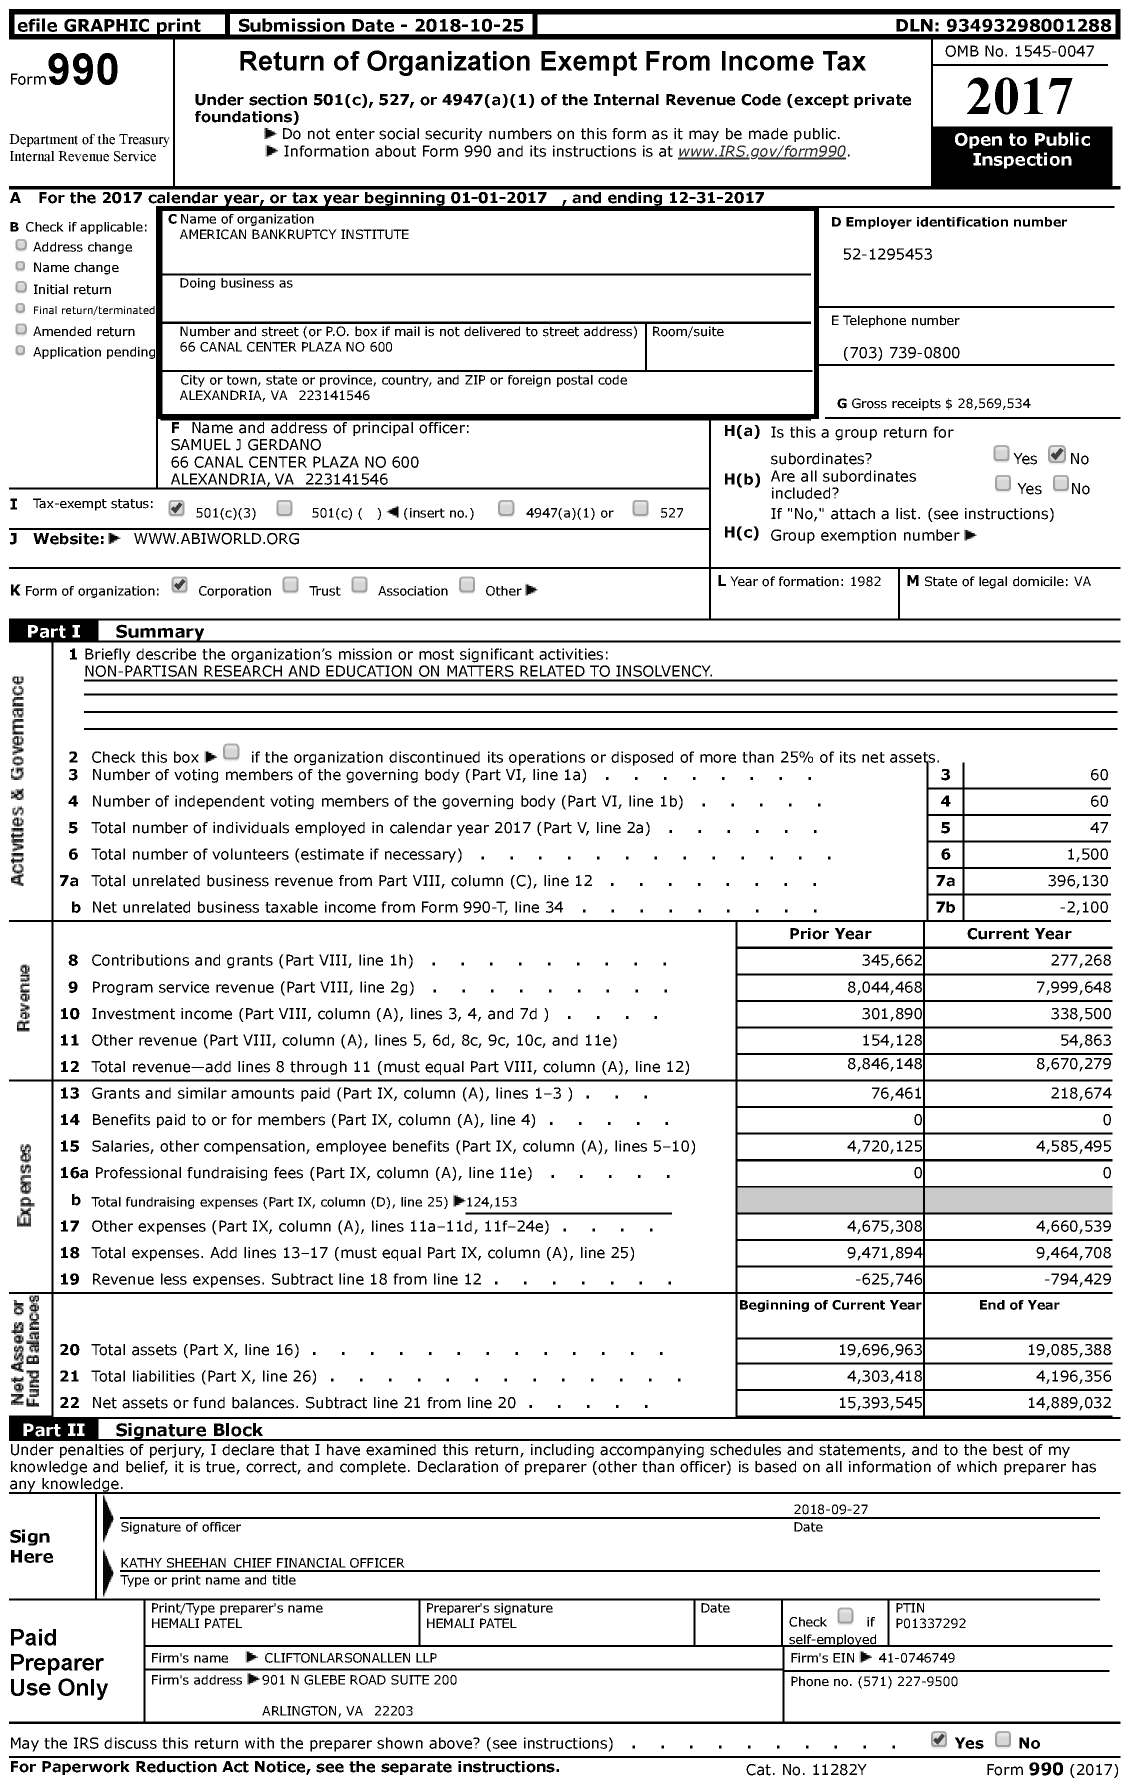 Image of first page of 2017 Form 990 for American Bankruptcy Institute (ABI)